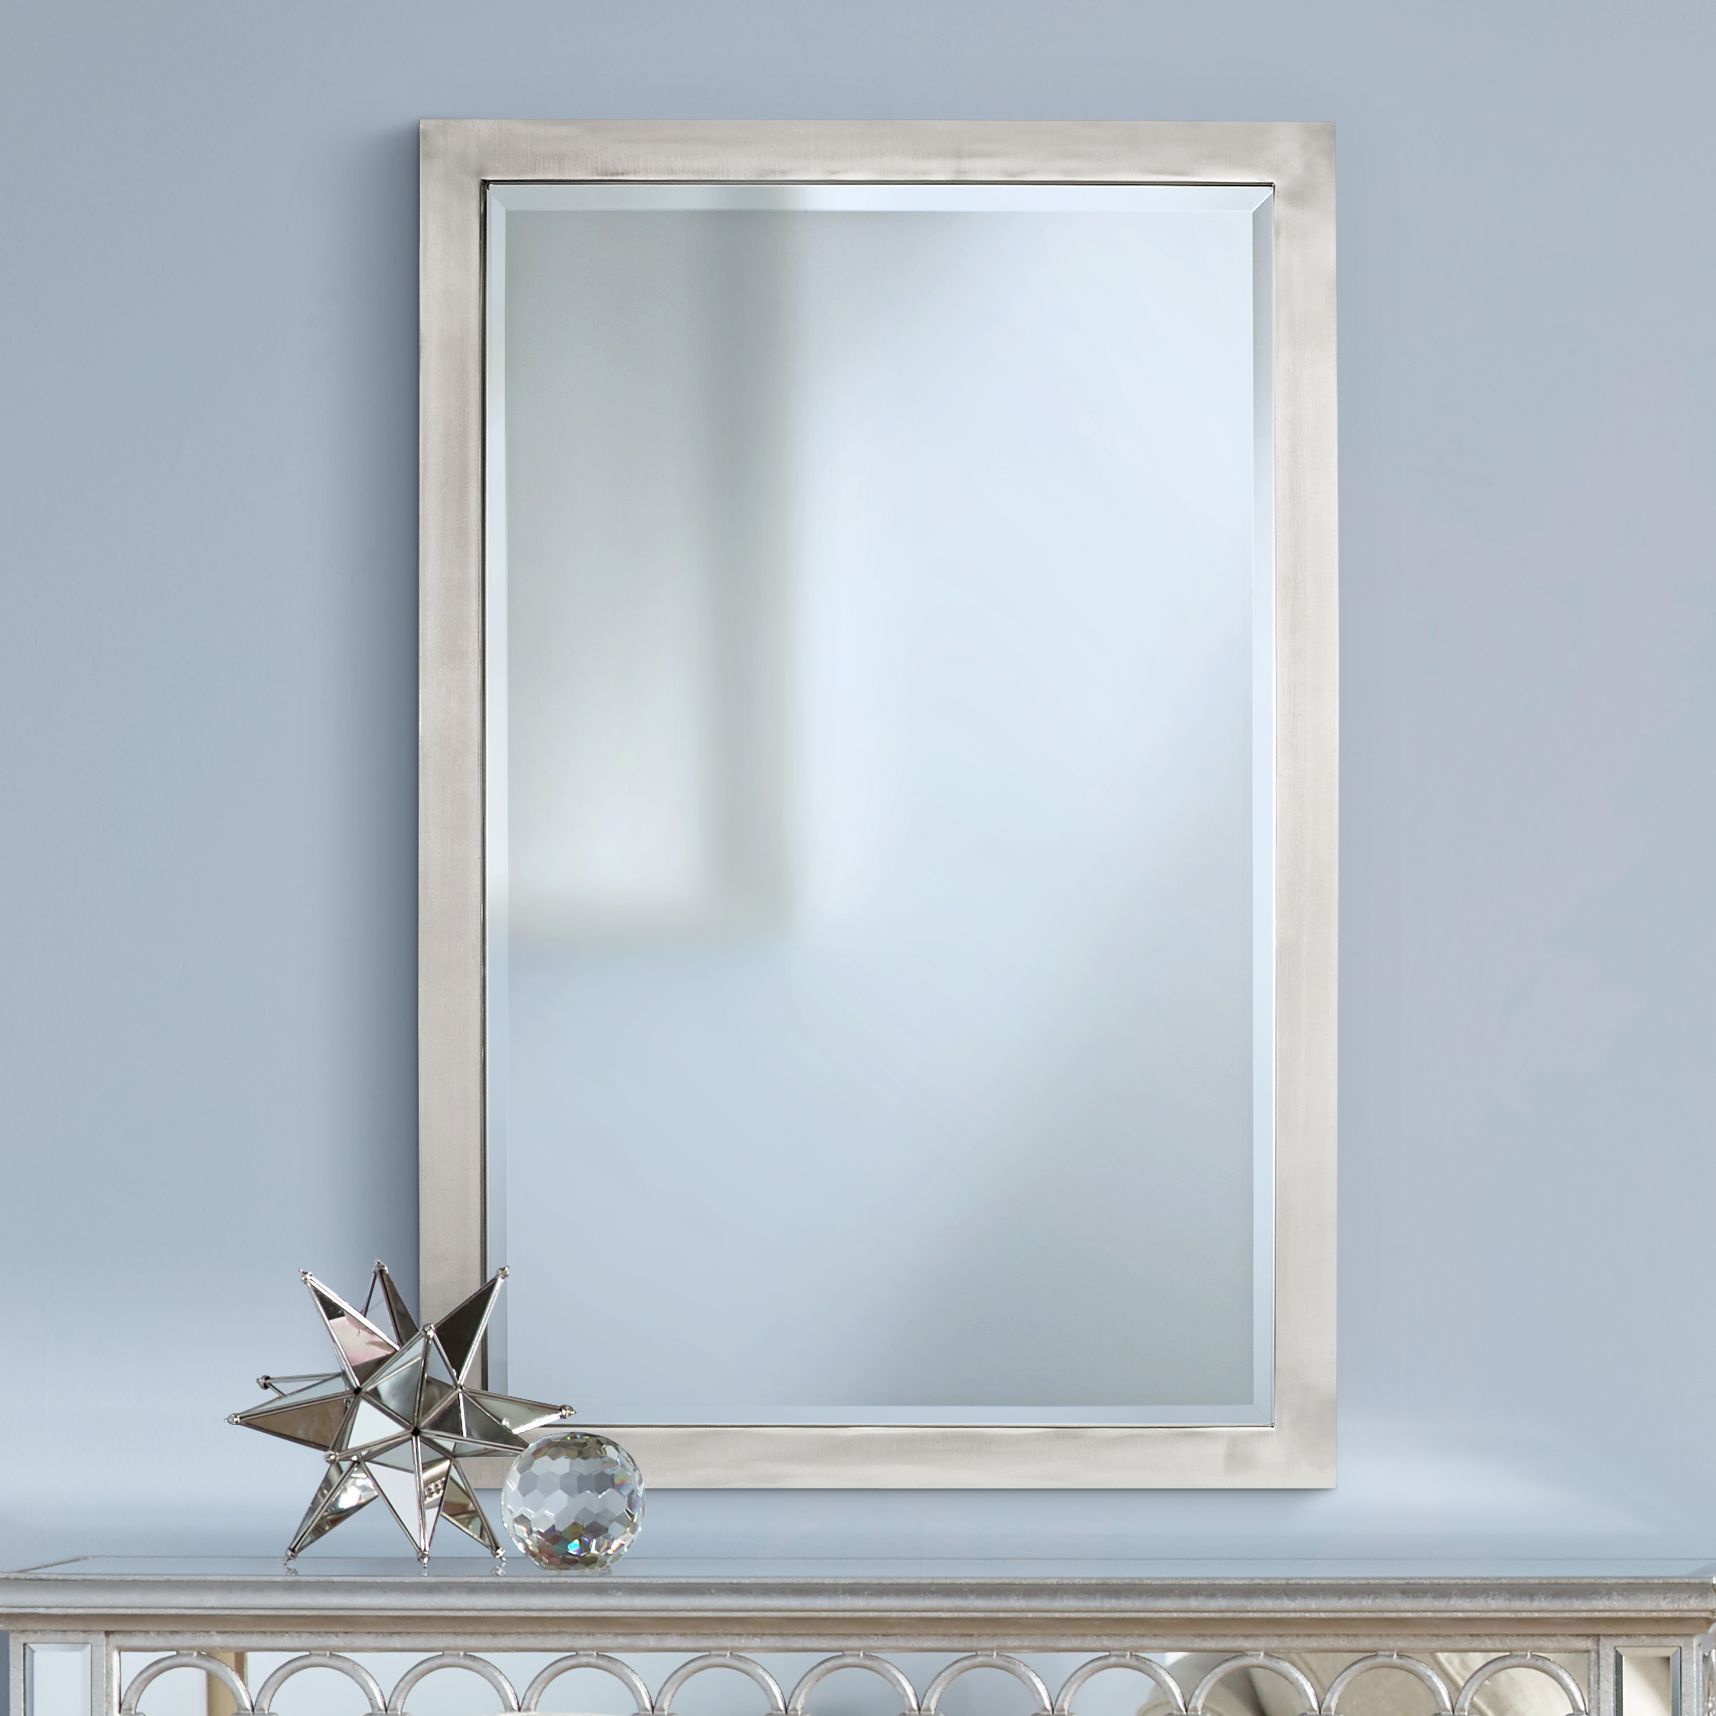 Metzeo 33" X 22" Brushed Nickel Wall Mirror – #T4543 | Lamps Plus In In Nickel Floating Wall Mirrors (View 8 of 15)